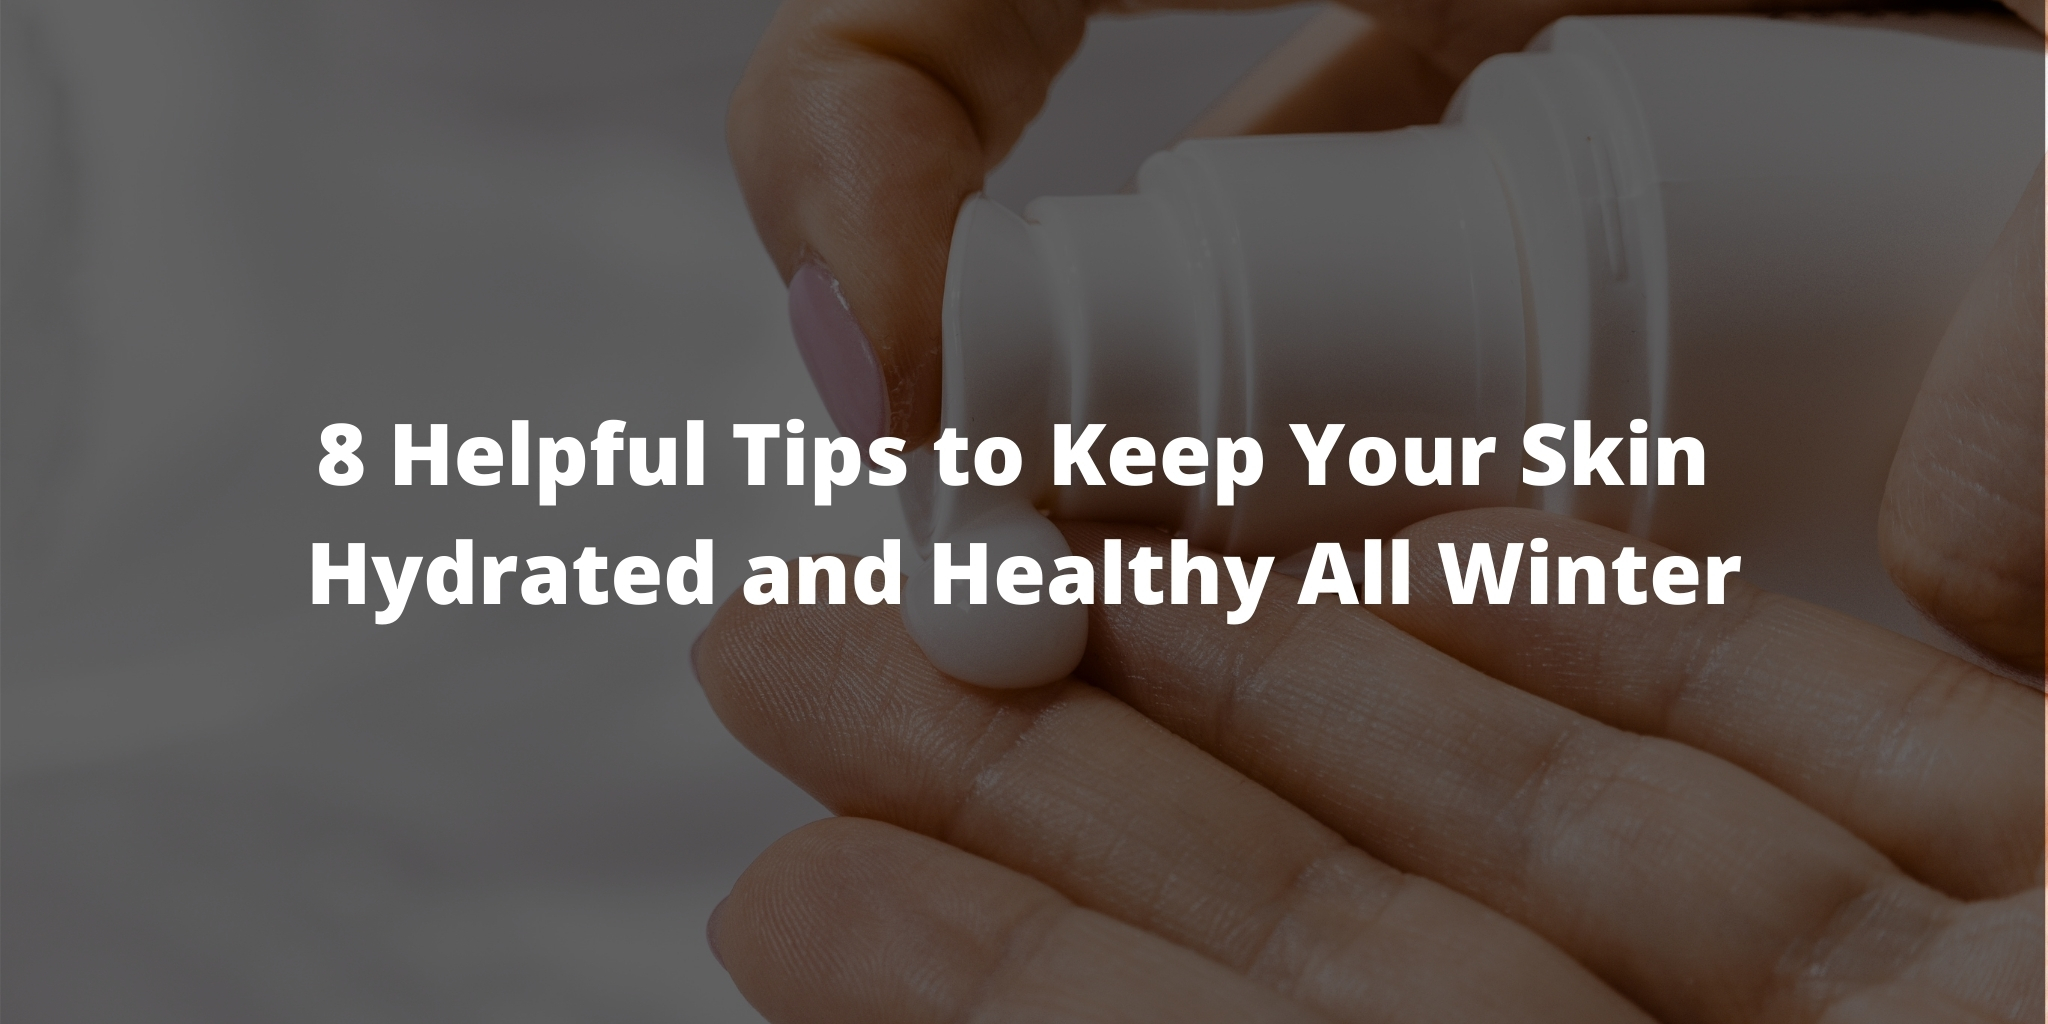 8 Helpful Tips to Keep Your Skin Hydrated and Healthy All Winter